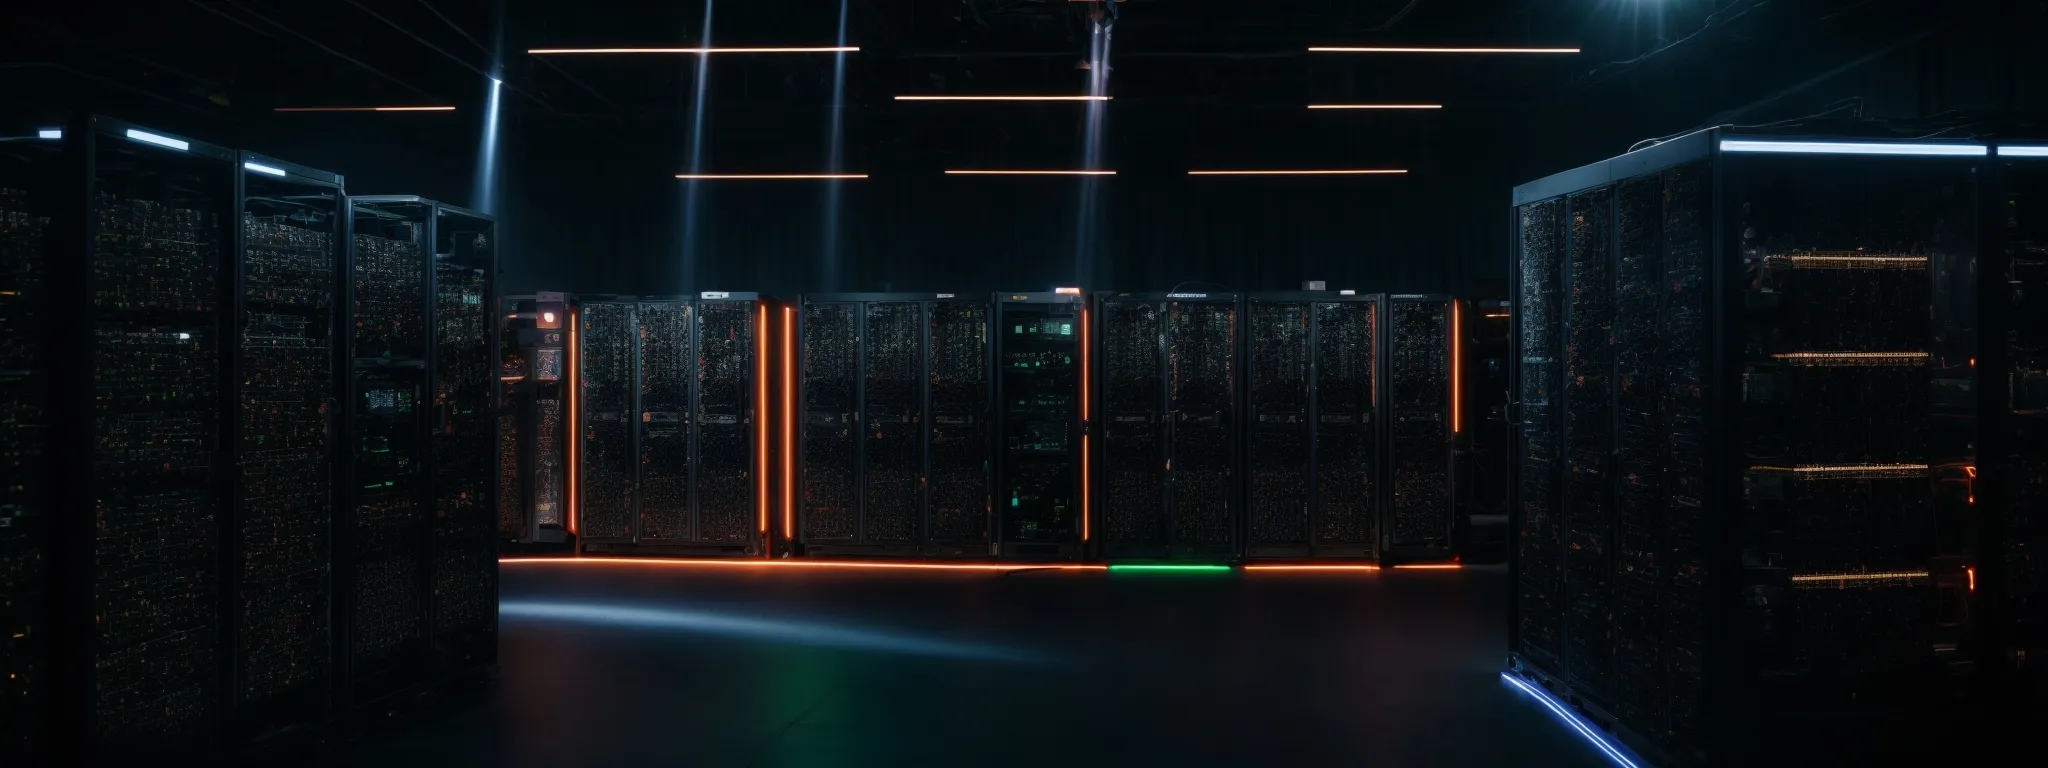 a group of network servers with glowing lights signifying the transfer and integration of data across platforms.